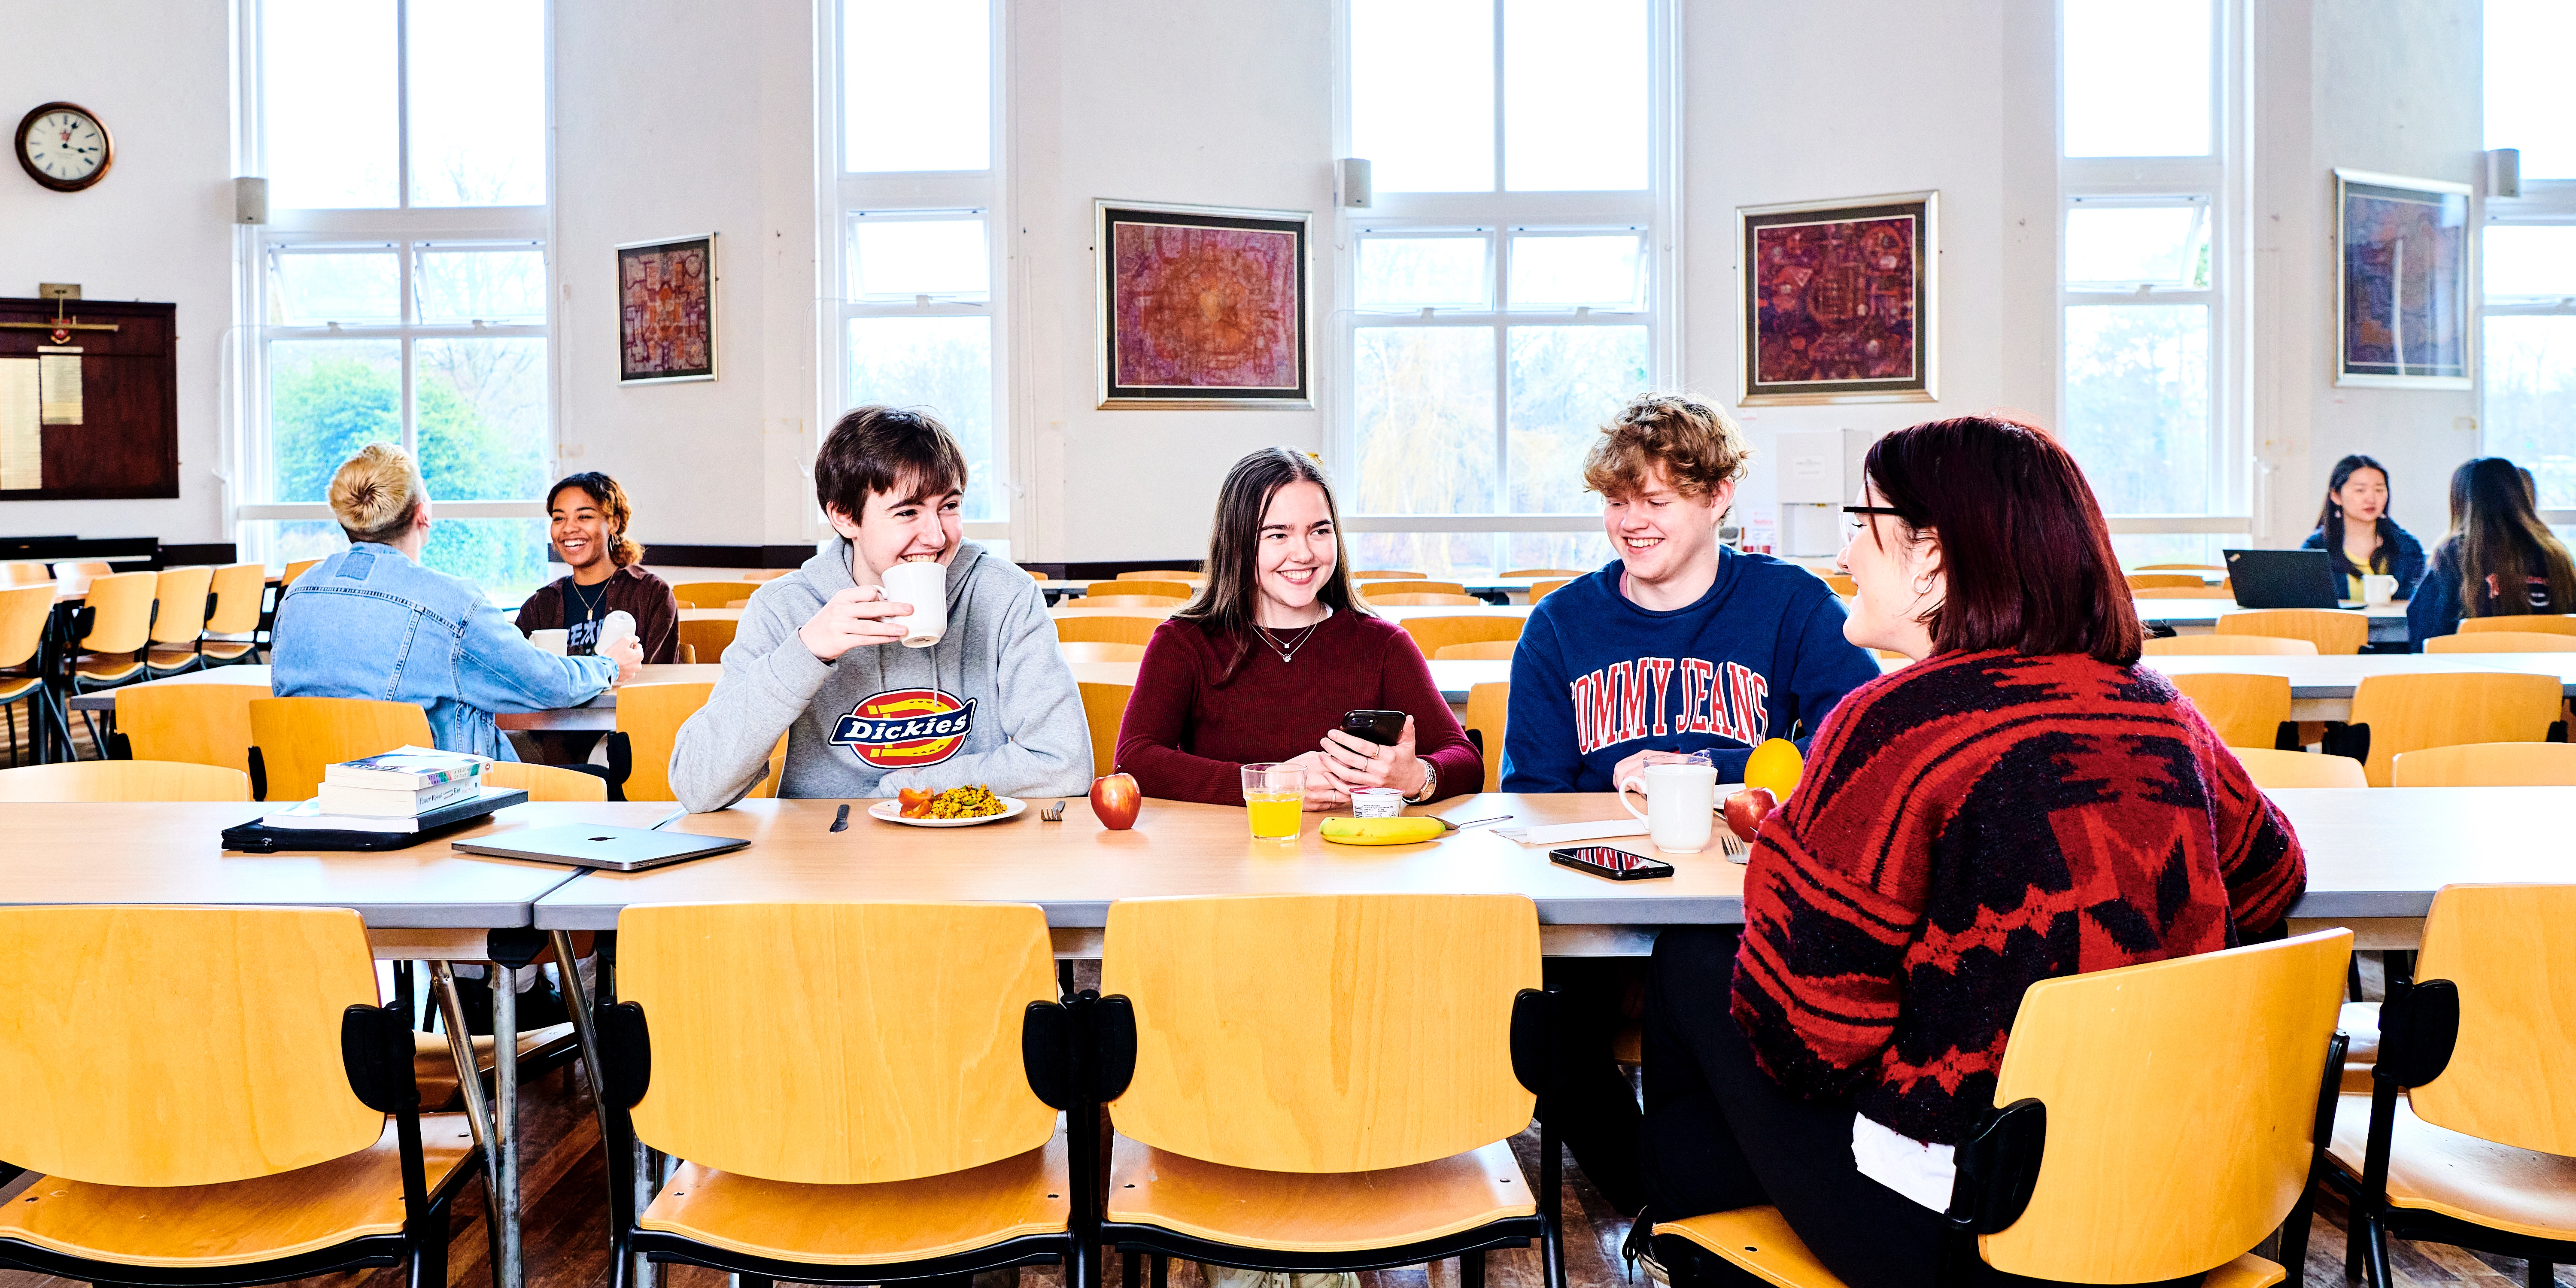 Male and female students sit at long tables, eating and socialising. The dining hall is brightly lit, with high ceiling and large windowstbc